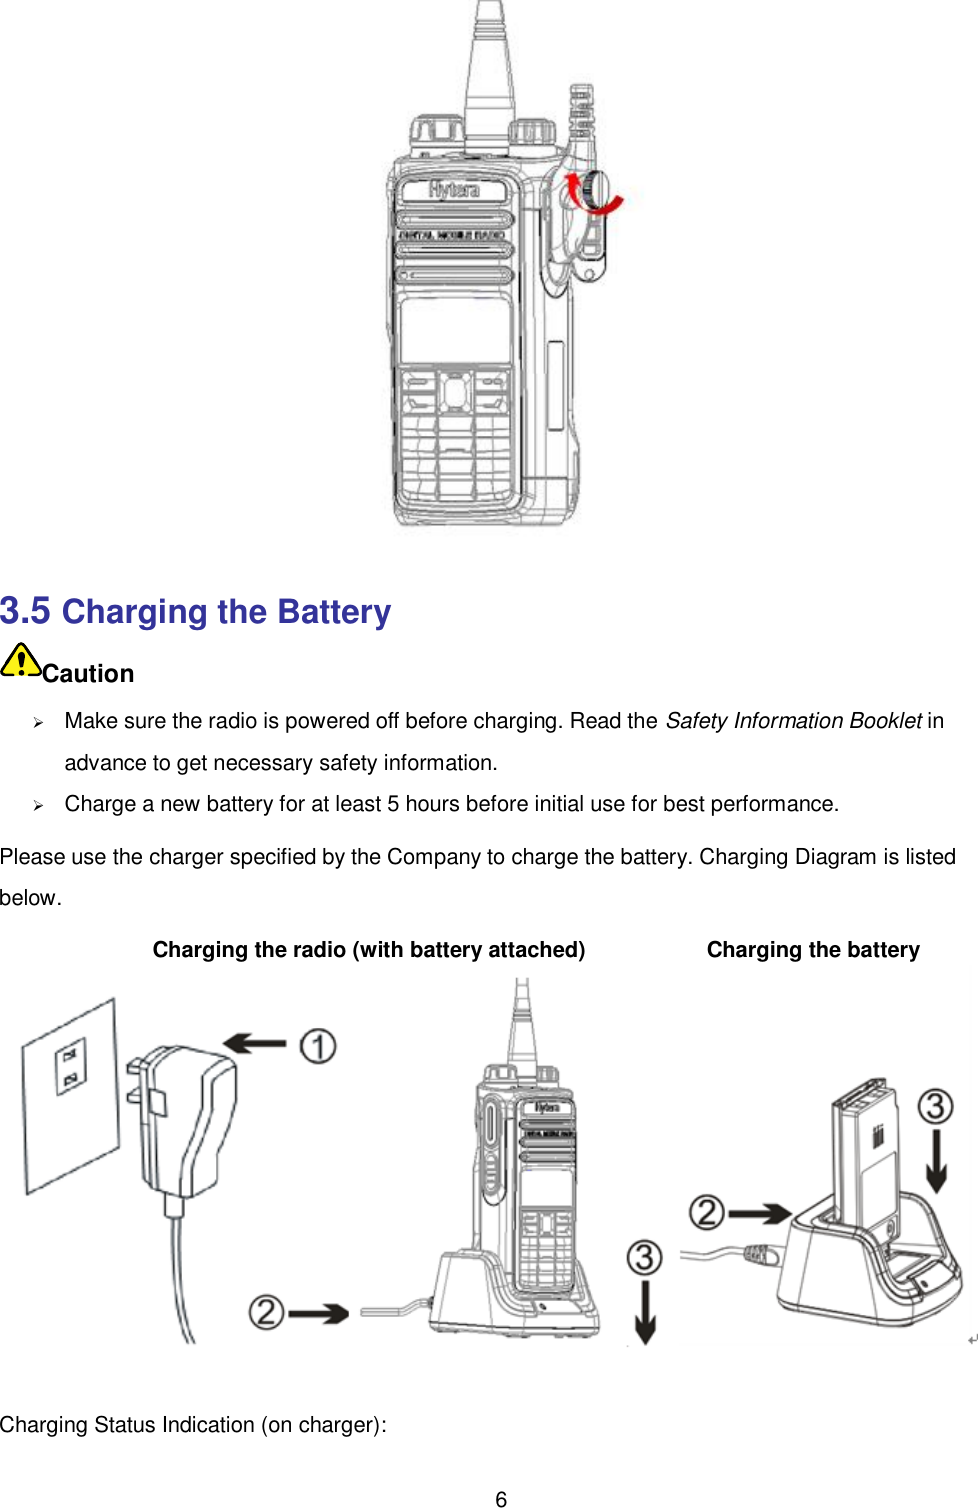  6  3.5 Charging the Battery Caution  Make sure the radio is powered off before charging. Read the Safety Information Booklet in advance to get necessary safety information.    Charge a new battery for at least 5 hours before initial use for best performance. Please use the charger specified by the Company to charge the battery. Charging Diagram is listed below.            Charging the radio (with battery attached)            Charging the battery  Charging Status Indication (on charger):   